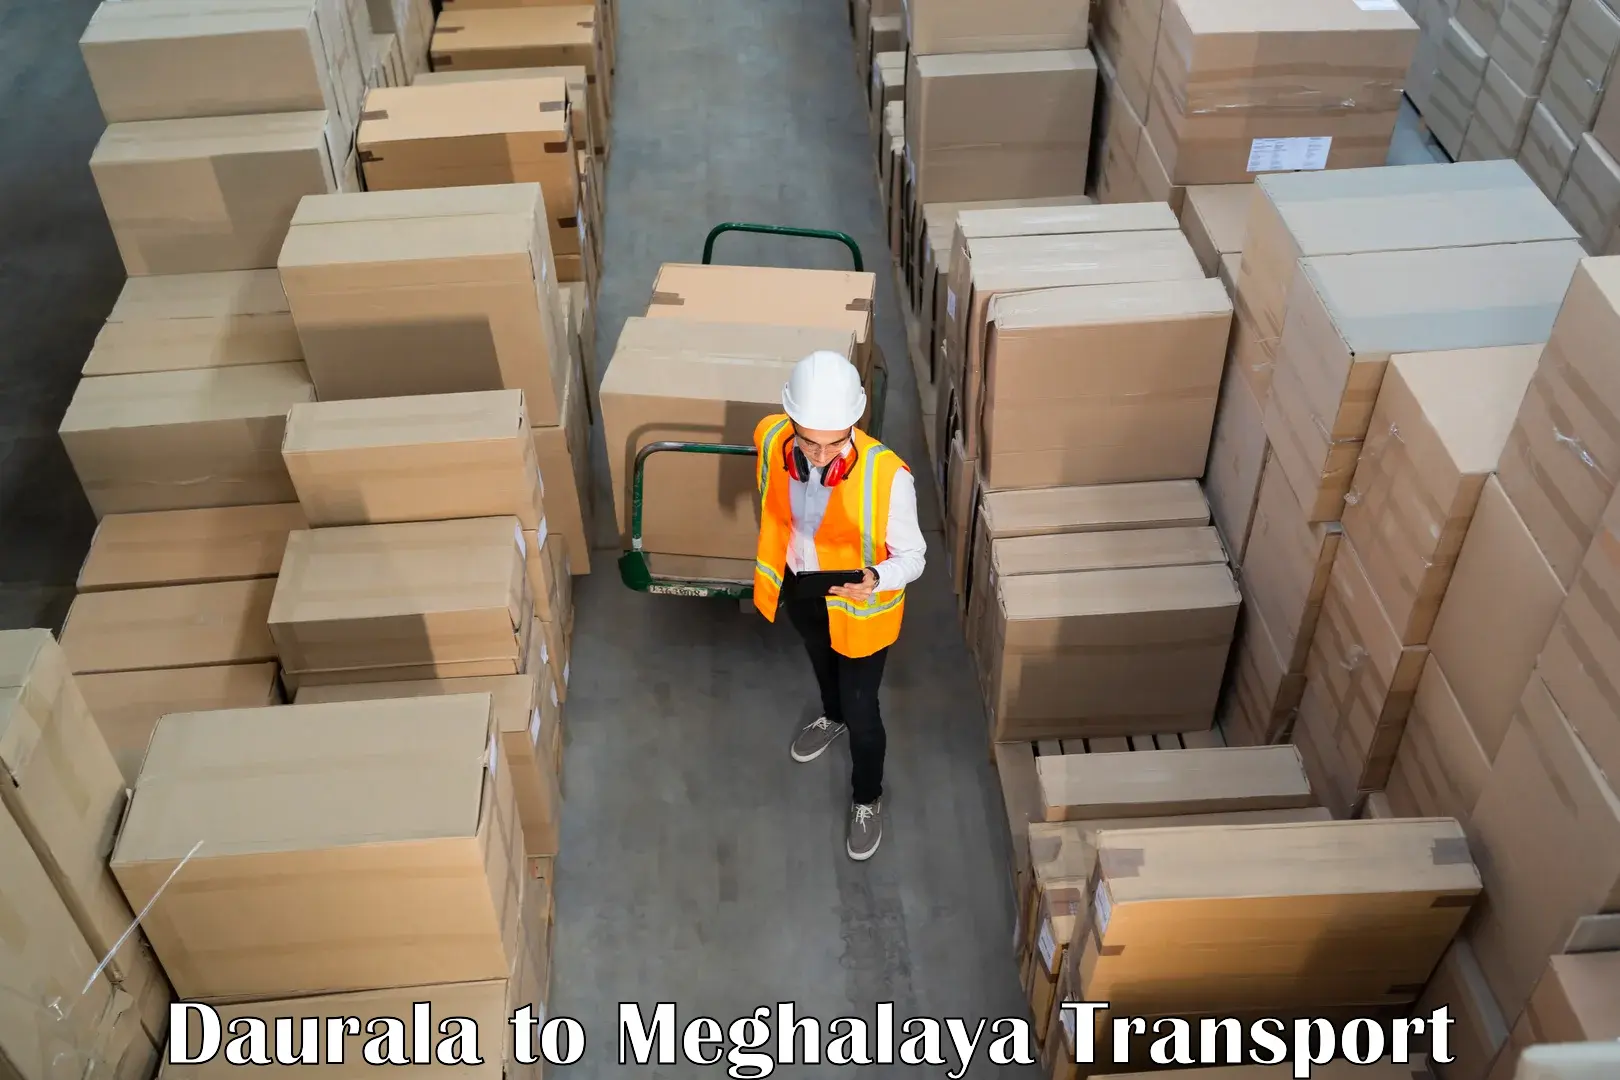 Part load transport service in India in Daurala to Shillong